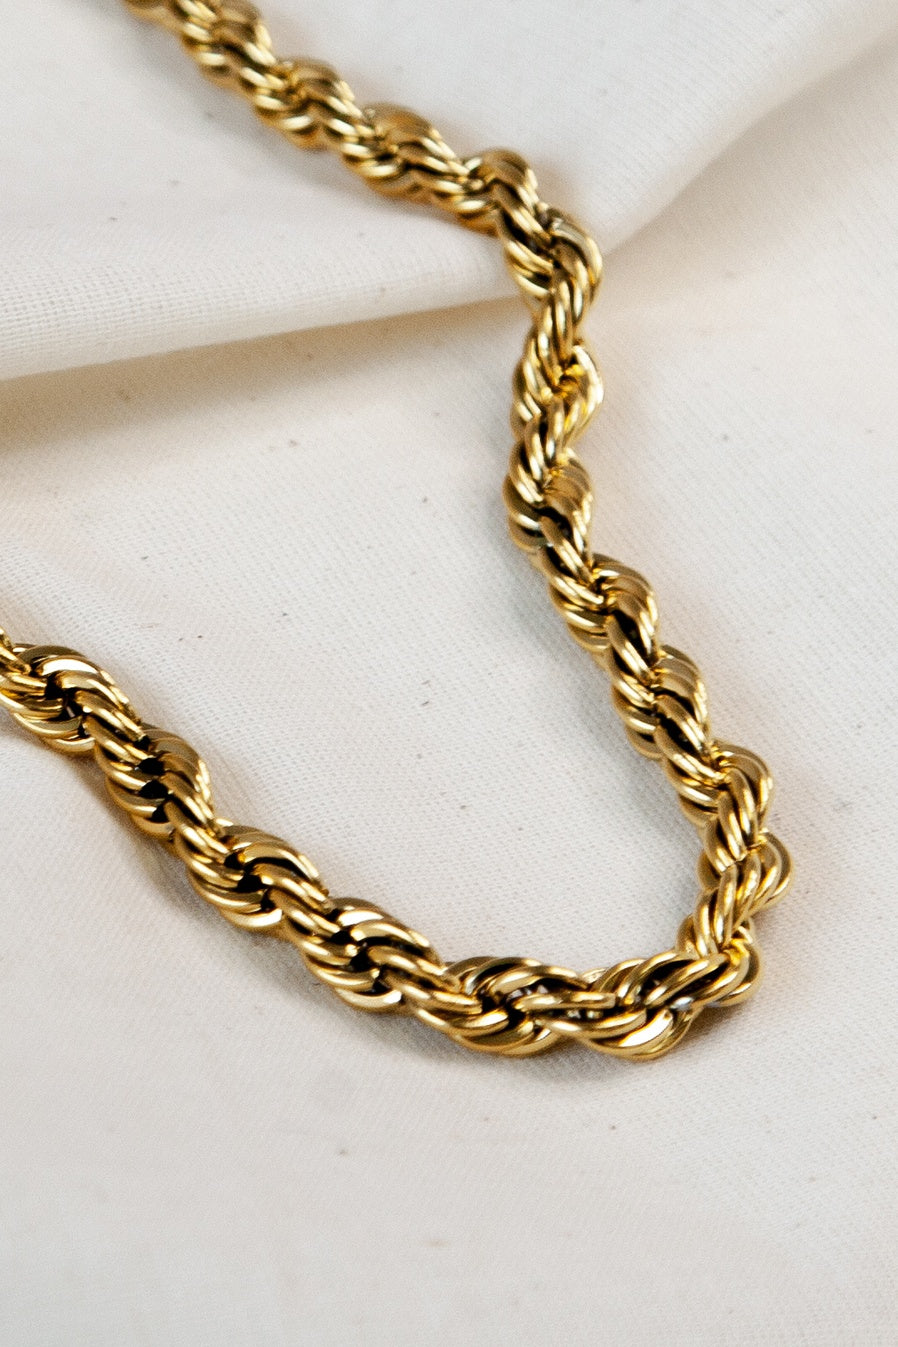 Diana Chain - 8mm Gold